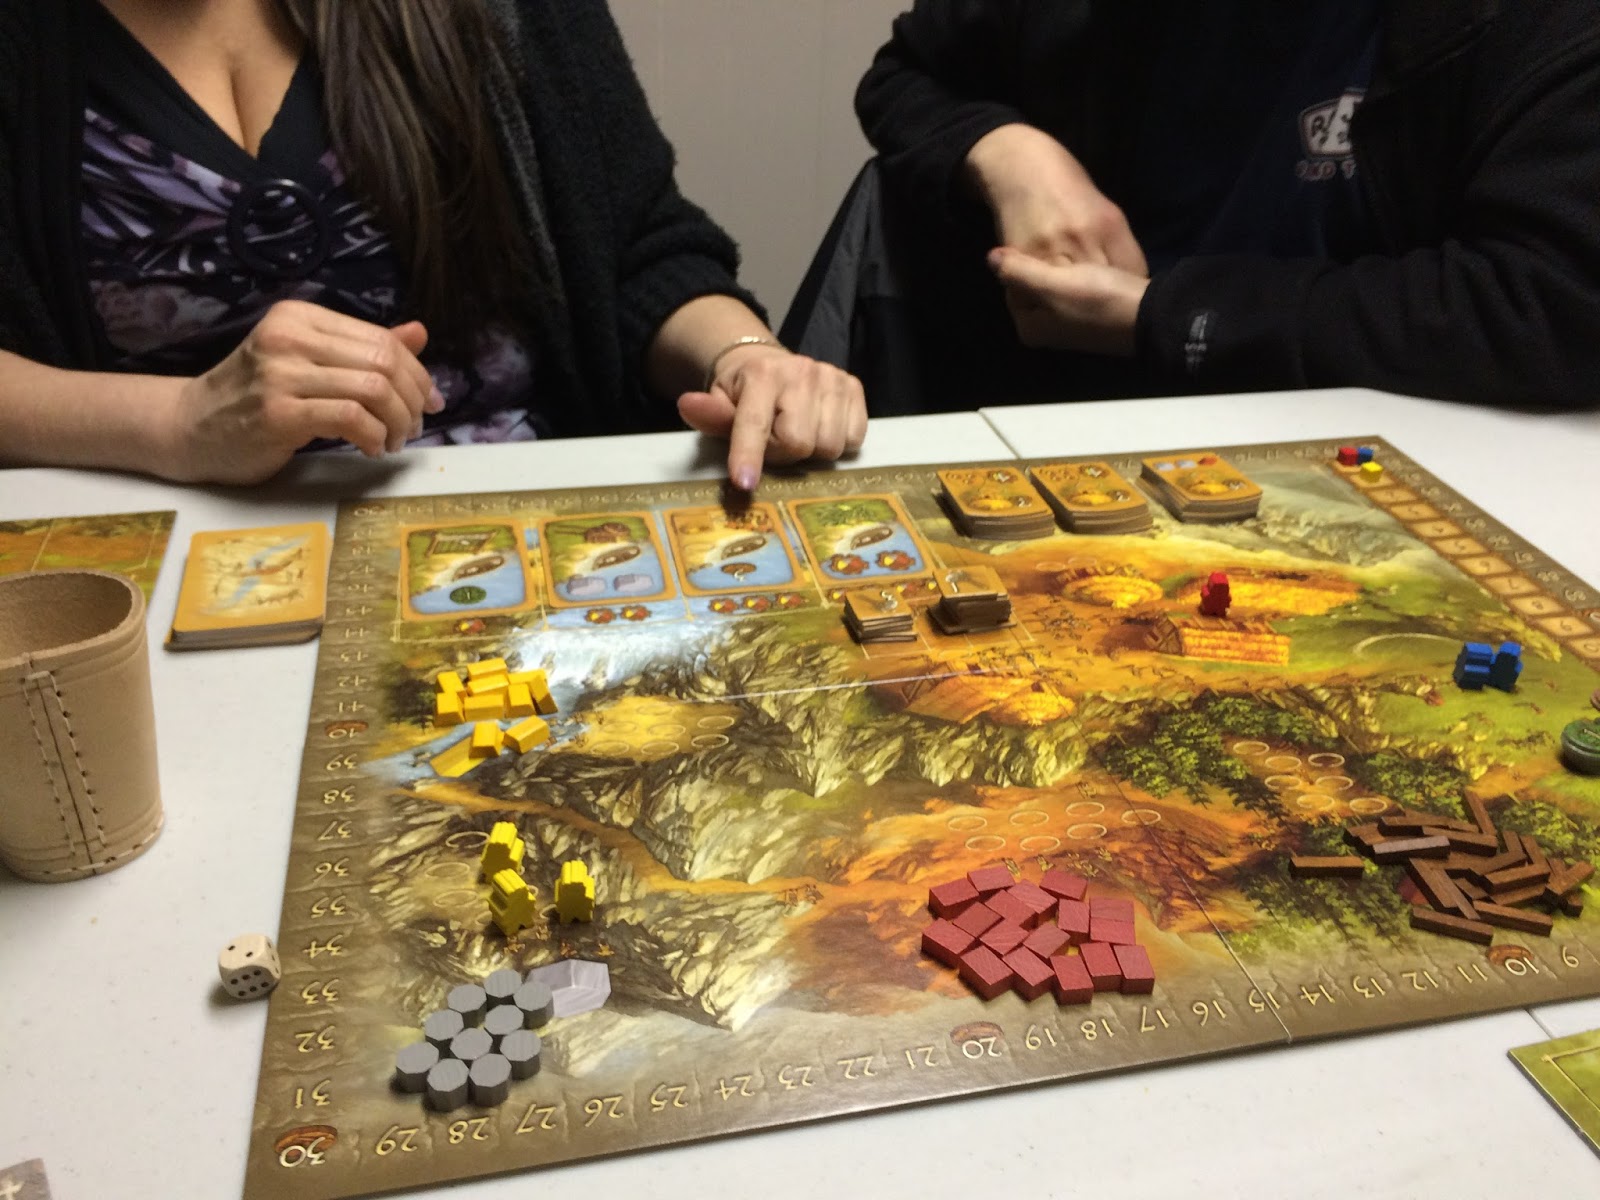 Byteknight's Tabletop : Game of Stones.... enjoyable session with ...